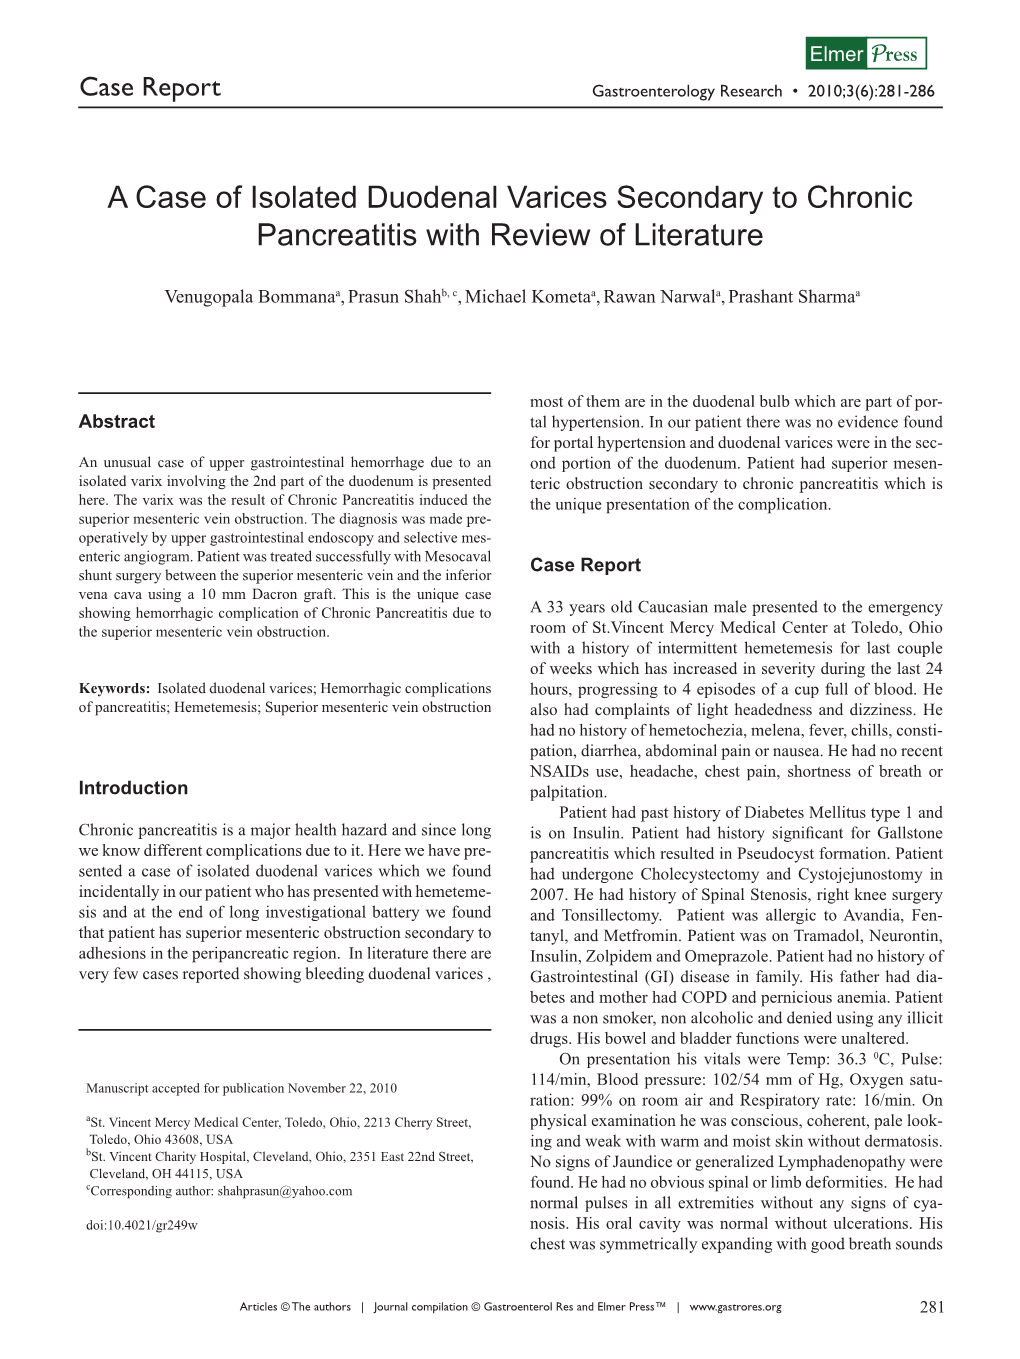 A Case of Isolated Duodenal Varices Secondary to Chronic Pancreatitis with Review of Literature